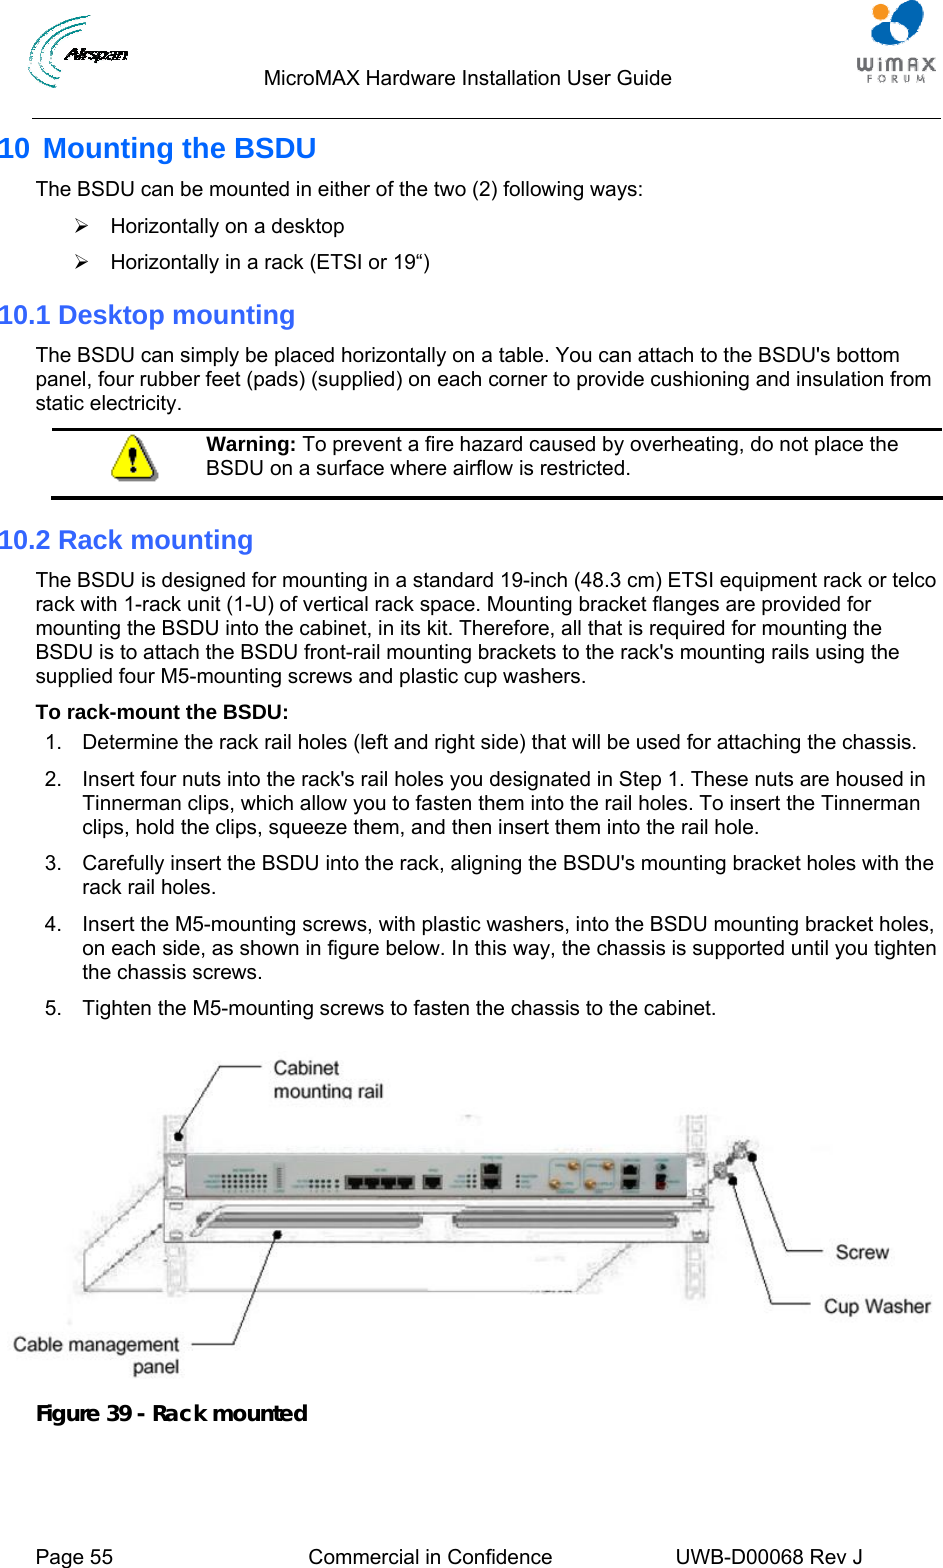                                  MicroMAX Hardware Installation User Guide     Page 55  Commercial in Confidence  UWB-D00068 Rev J   10 Mounting the BSDU The BSDU can be mounted in either of the two (2) following ways:  ¾  Horizontally on a desktop ¾  Horizontally in a rack (ETSI or 19“)  10.1 Desktop mounting The BSDU can simply be placed horizontally on a table. You can attach to the BSDU&apos;s bottom panel, four rubber feet (pads) (supplied) on each corner to provide cushioning and insulation from static electricity.  Warning: To prevent a fire hazard caused by overheating, do not place the BSDU on a surface where airflow is restricted. 10.2 Rack mounting The BSDU is designed for mounting in a standard 19-inch (48.3 cm) ETSI equipment rack or telco rack with 1-rack unit (1-U) of vertical rack space. Mounting bracket flanges are provided for mounting the BSDU into the cabinet, in its kit. Therefore, all that is required for mounting the BSDU is to attach the BSDU front-rail mounting brackets to the rack&apos;s mounting rails using the supplied four M5-mounting screws and plastic cup washers. To rack-mount the BSDU: 1.  Determine the rack rail holes (left and right side) that will be used for attaching the chassis. 2.  Insert four nuts into the rack&apos;s rail holes you designated in Step 1. These nuts are housed in Tinnerman clips, which allow you to fasten them into the rail holes. To insert the Tinnerman clips, hold the clips, squeeze them, and then insert them into the rail hole. 3.  Carefully insert the BSDU into the rack, aligning the BSDU&apos;s mounting bracket holes with the rack rail holes. 4.  Insert the M5-mounting screws, with plastic washers, into the BSDU mounting bracket holes, on each side, as shown in figure below. In this way, the chassis is supported until you tighten the chassis screws. 5.  Tighten the M5-mounting screws to fasten the chassis to the cabinet.   Figure 39 - Rack mounted  